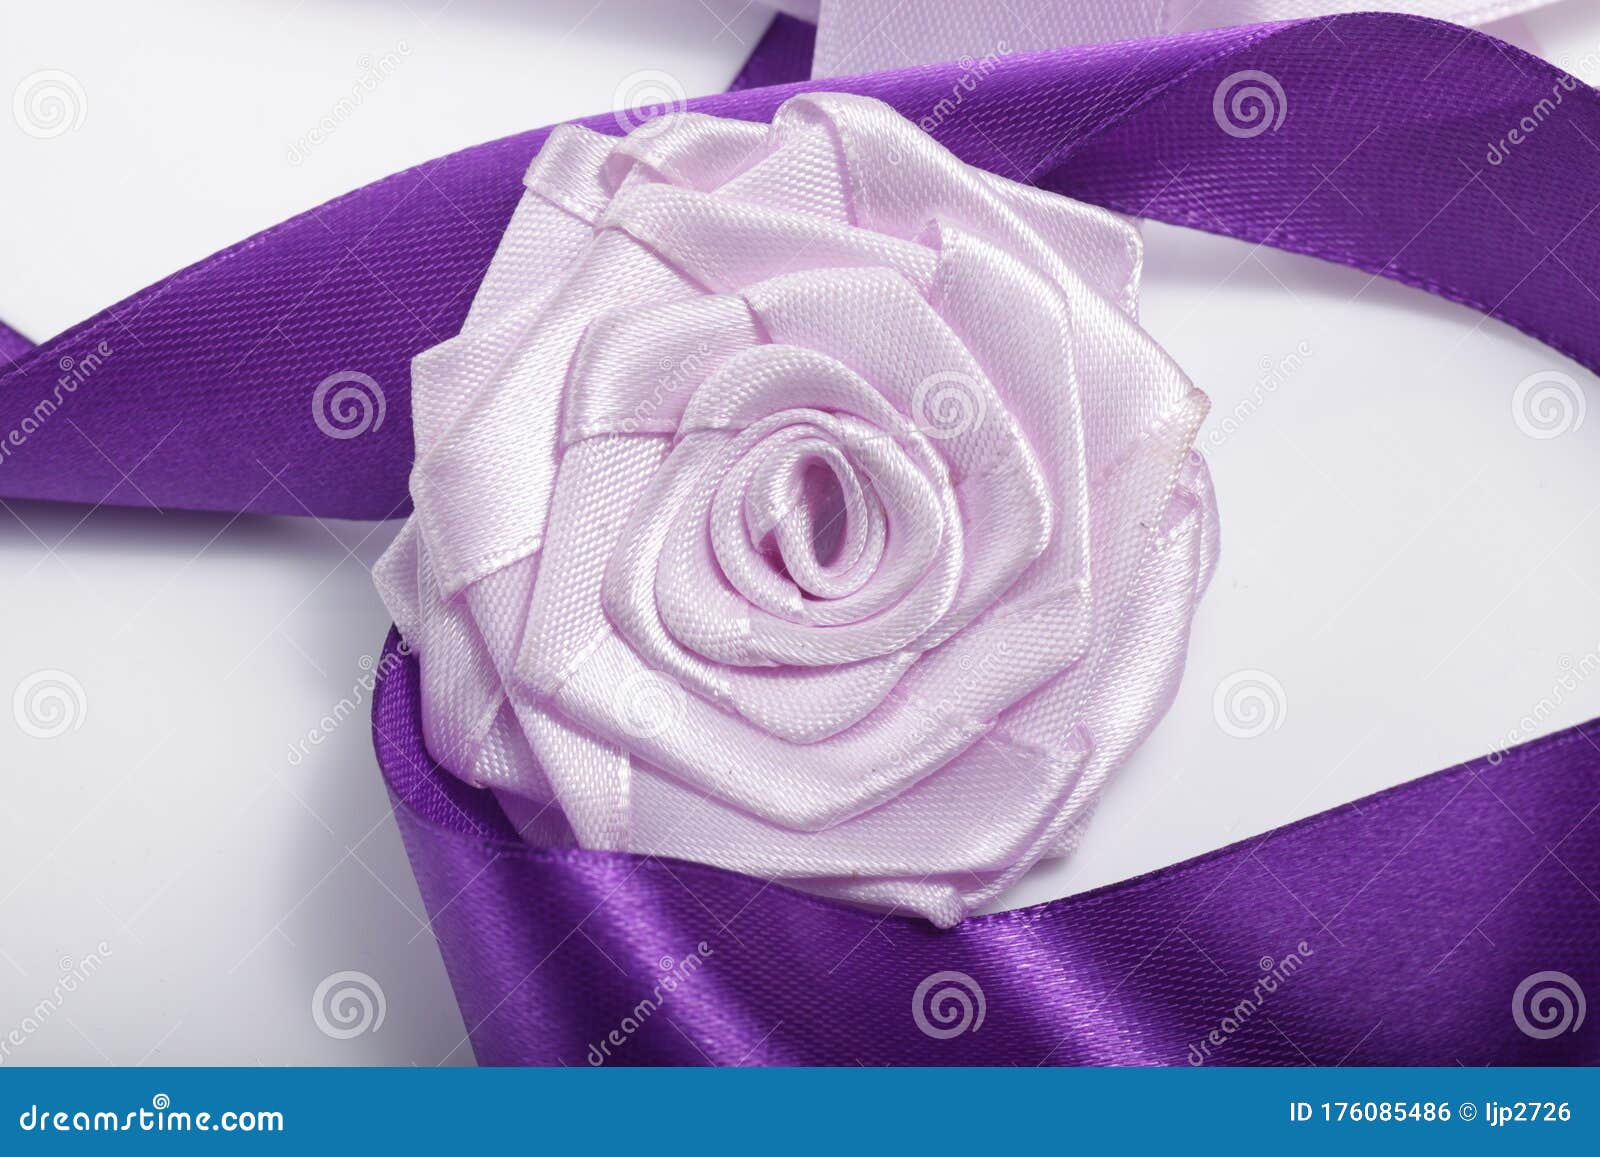 purple flower broche that made of satin ribbon